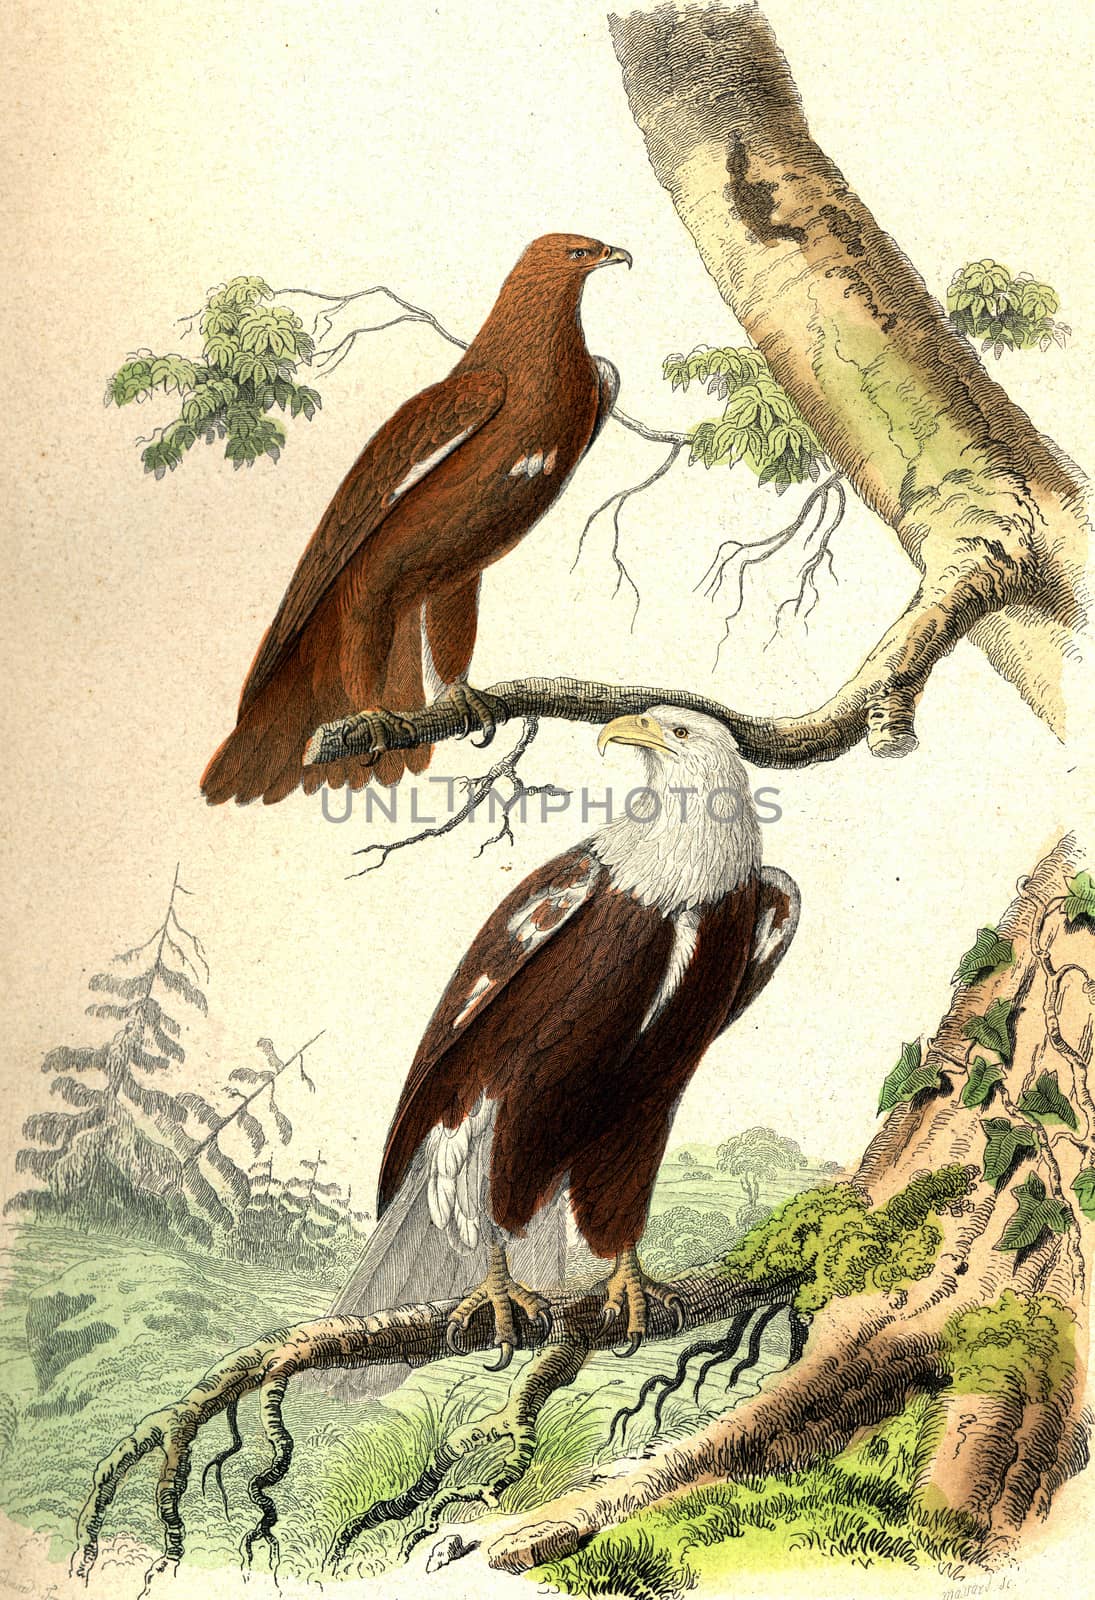 The Little Eagle or Eagle Screaming, The Eagle, vintage engraved illustration. From Buffon Complete Work.
